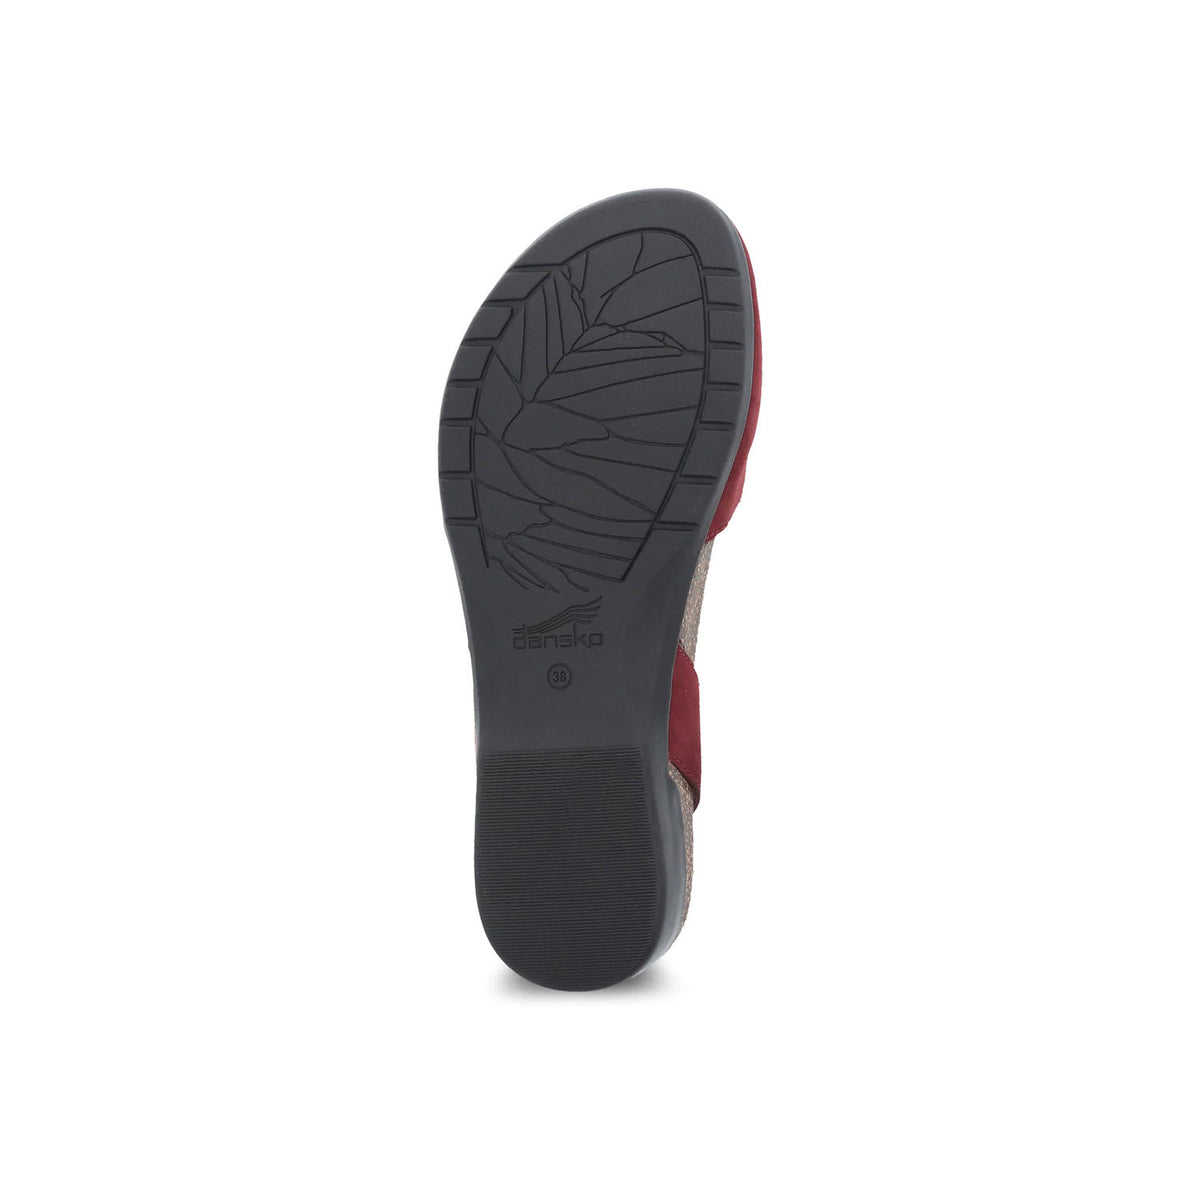 Sole of a shoe displaying a black tread pattern with a red accent, marked with the Dansko logo on a cork midsole featuring the Dansko Rowan Cinnabar - Womens.